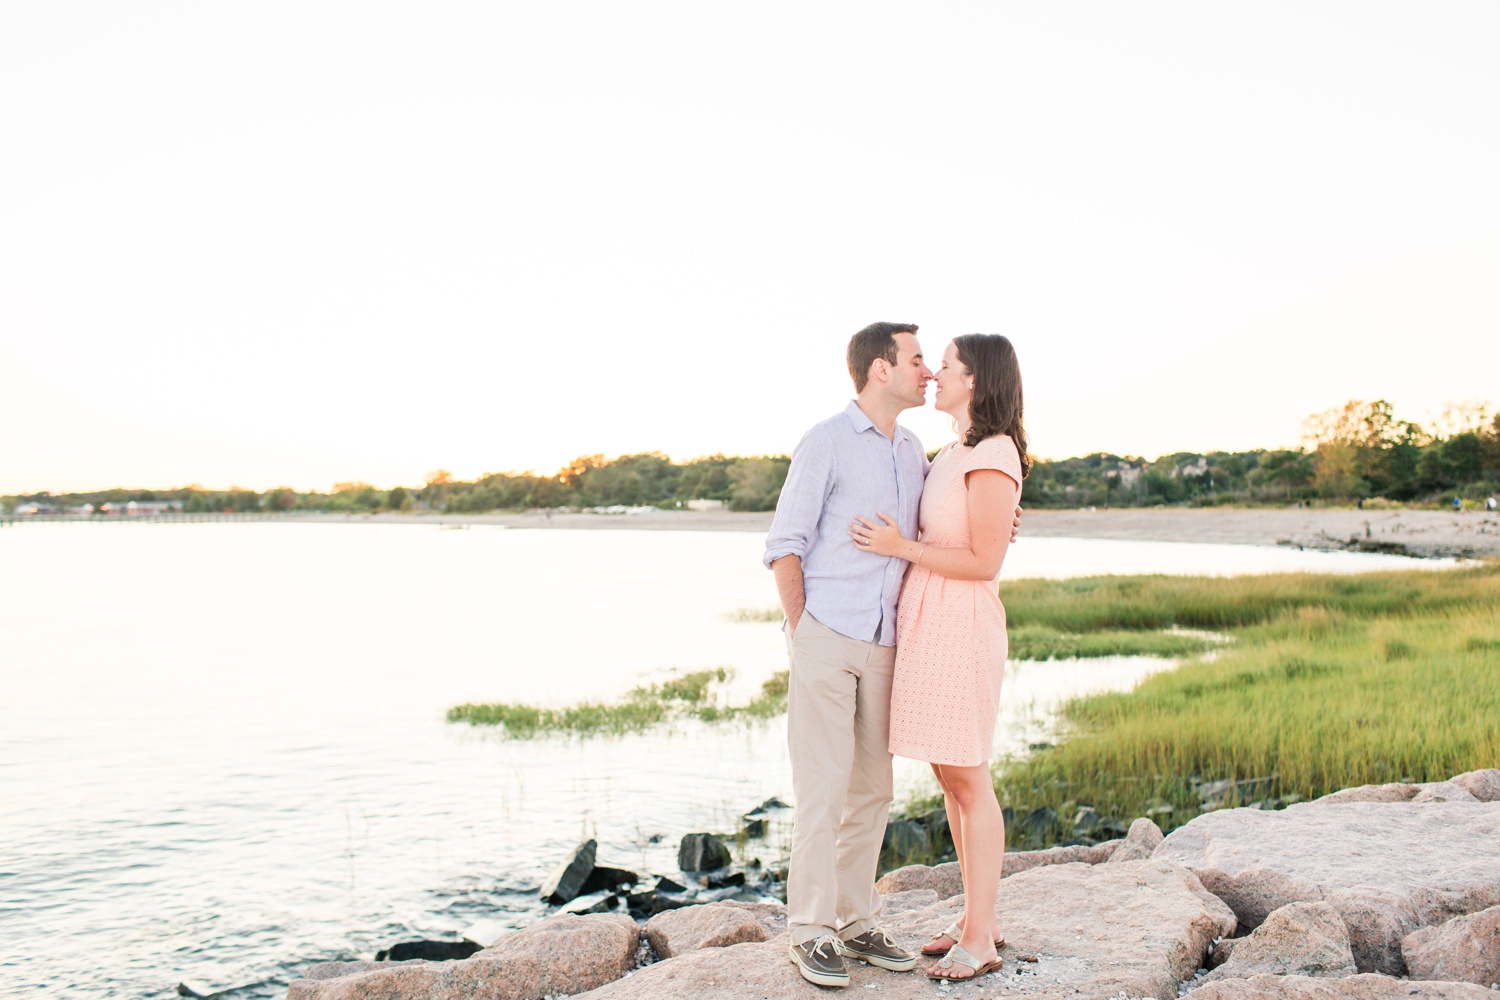 walnut-beach-engagement-session-milford-connecticut-top-ct-nyc-destination-wedding-photographer-shaina-lee-photography-photo